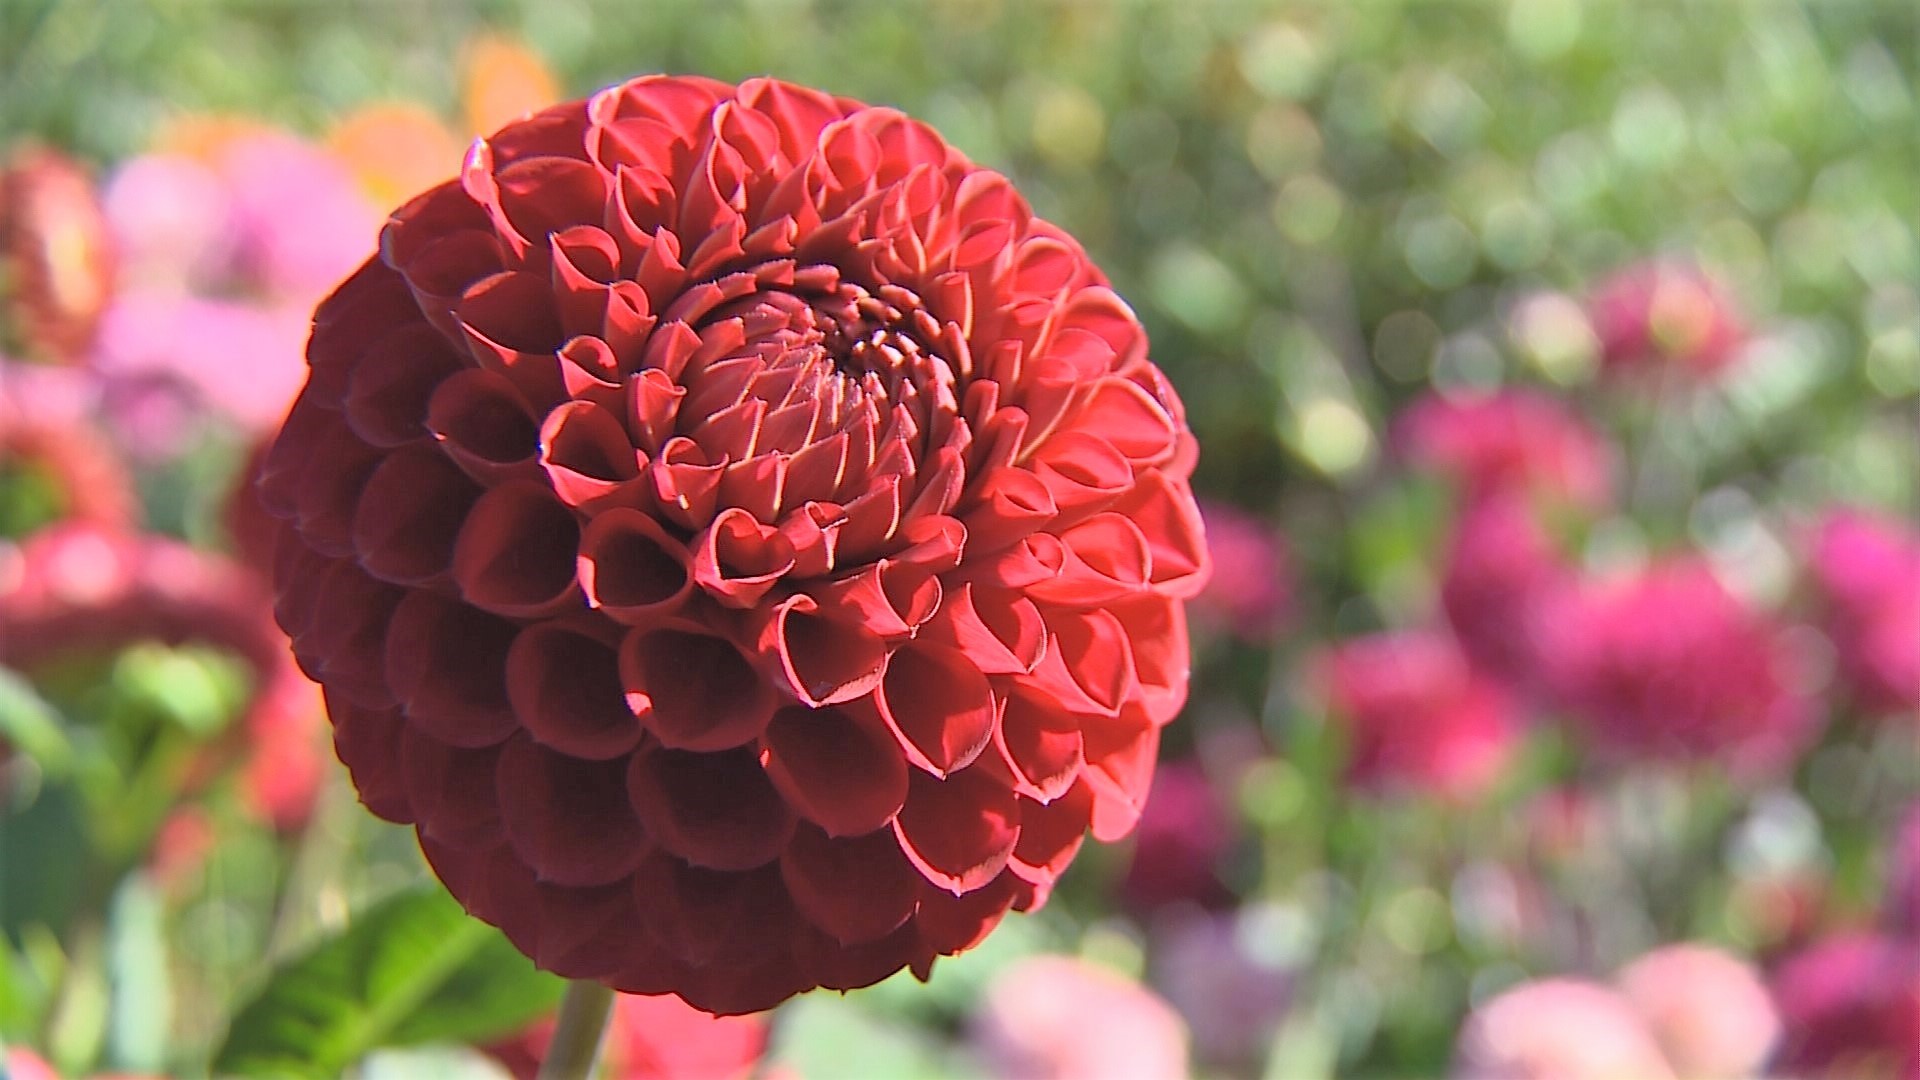 The 36 year old garden boasts more than 250 varieties of dahlias